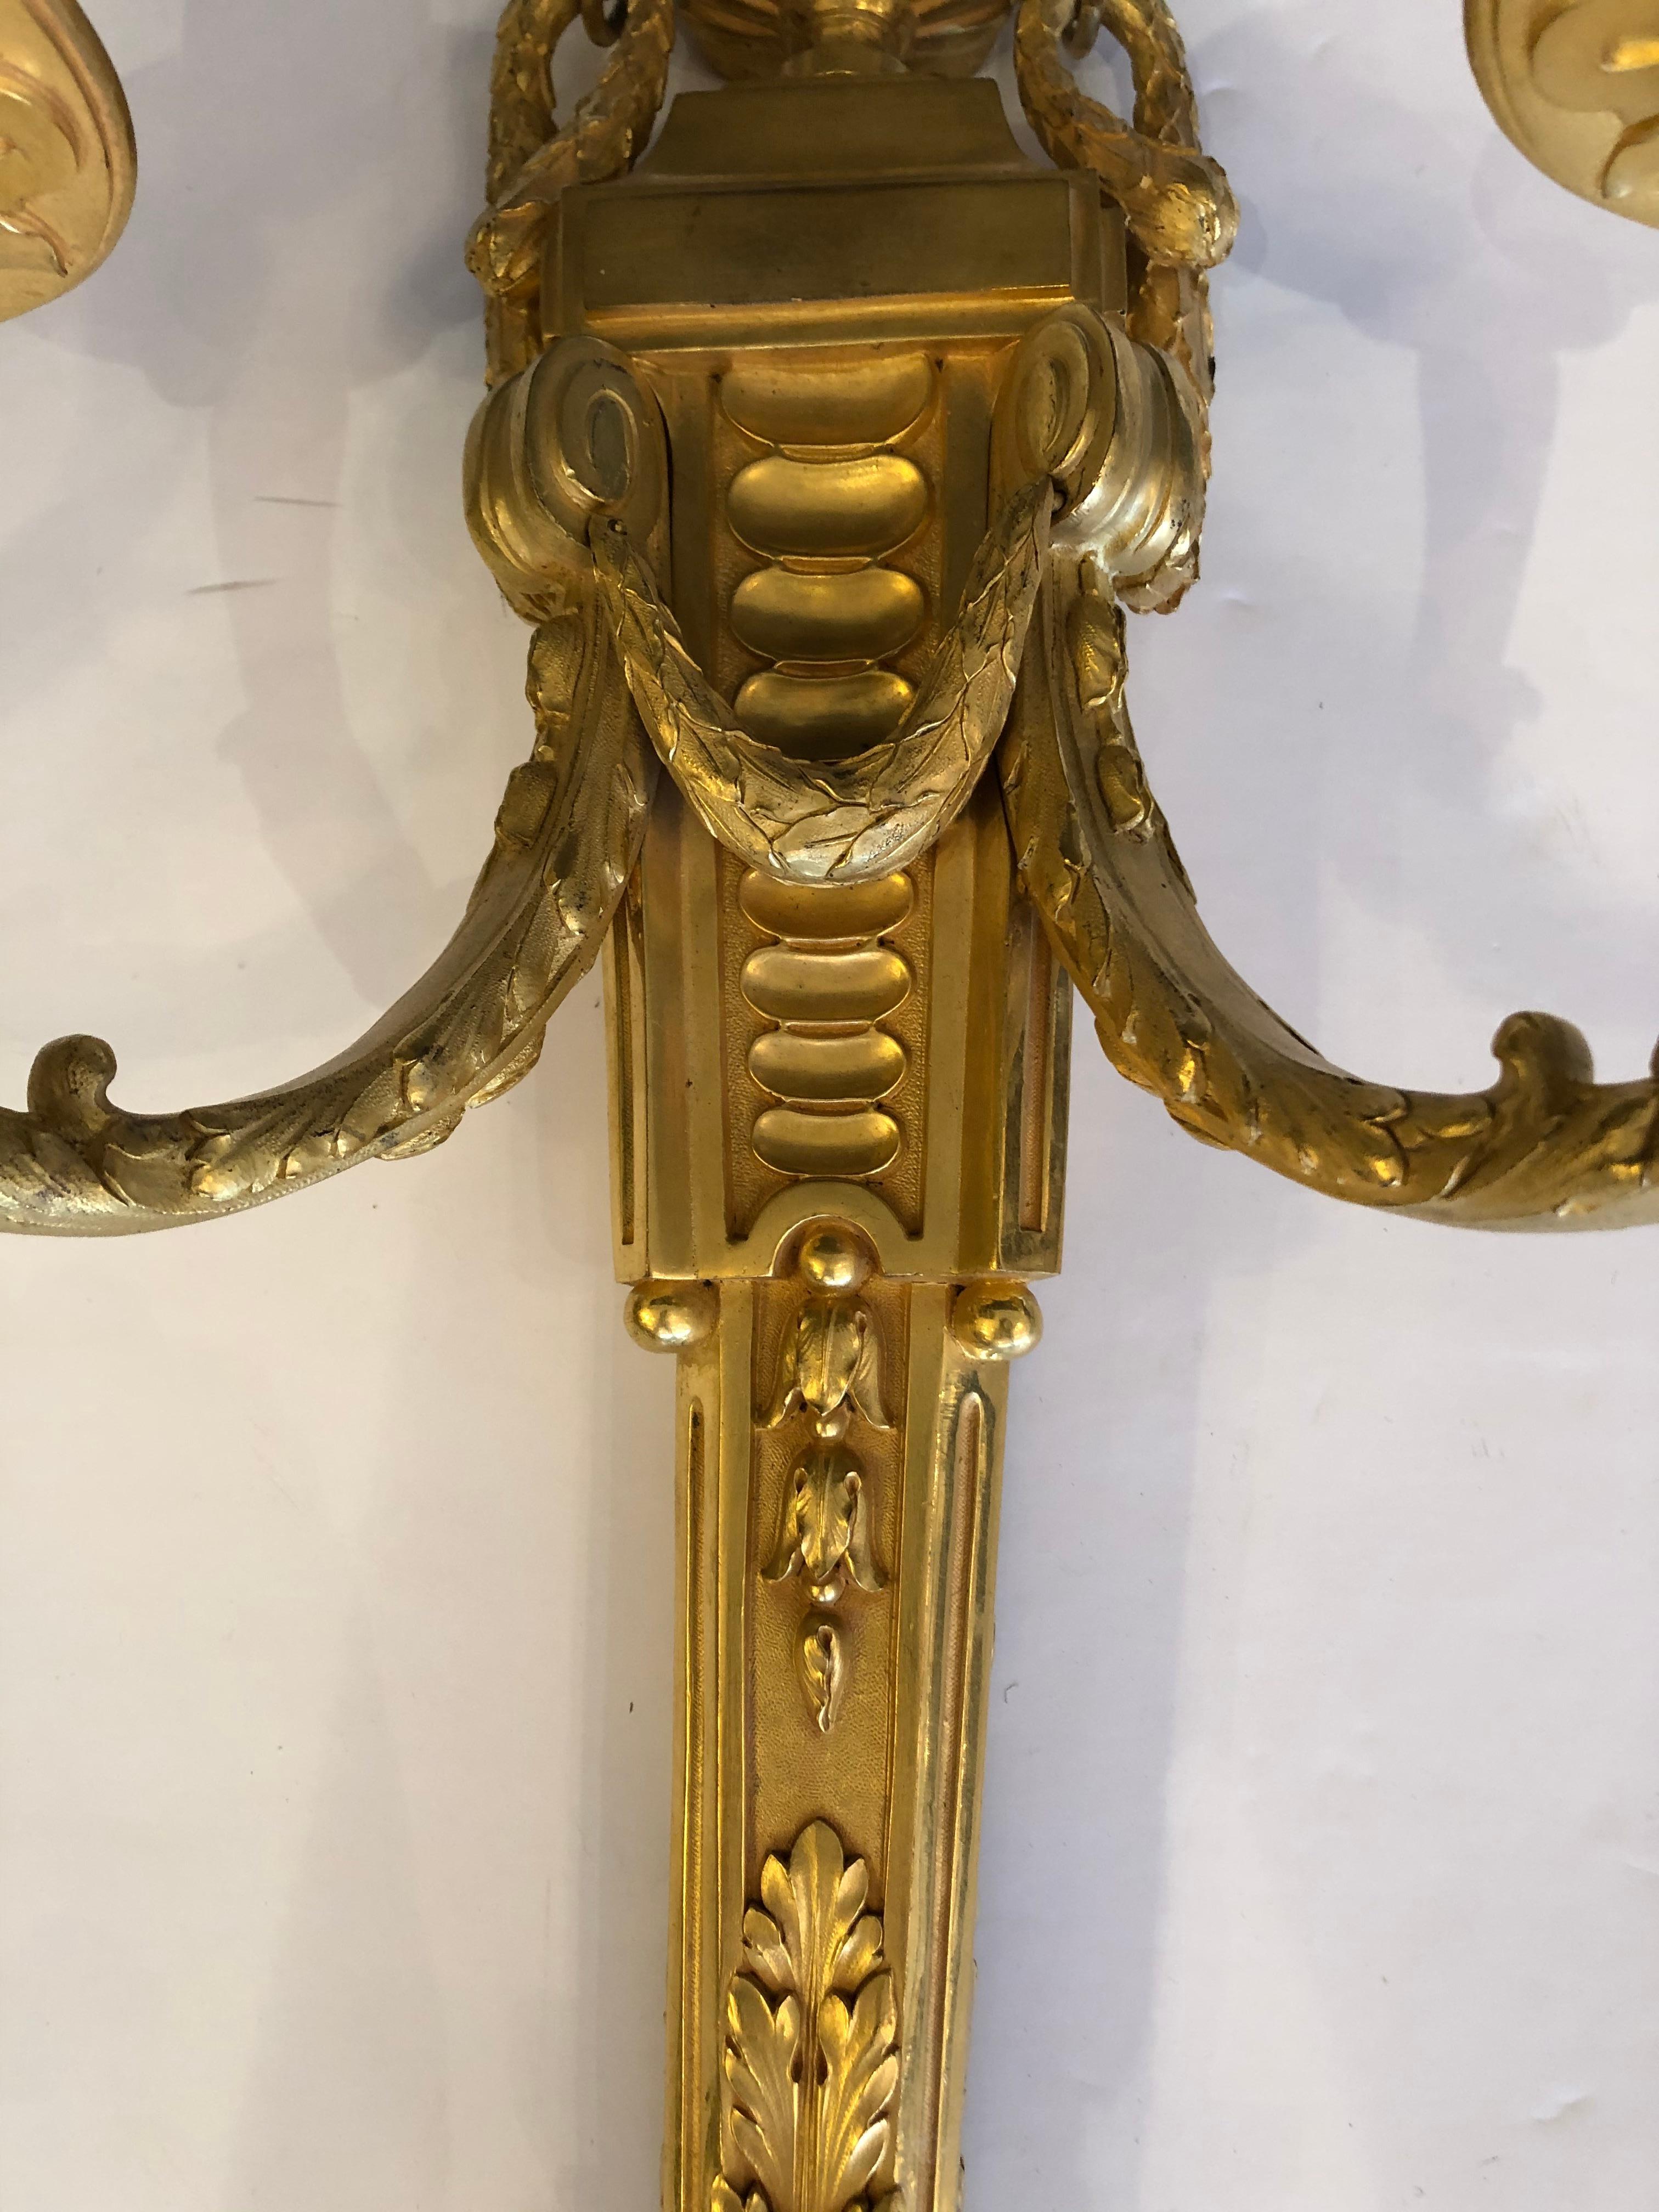 North American Awe Inspiring Dore Gilt Bronze Regency Style Sconces by Caldwell For Sale